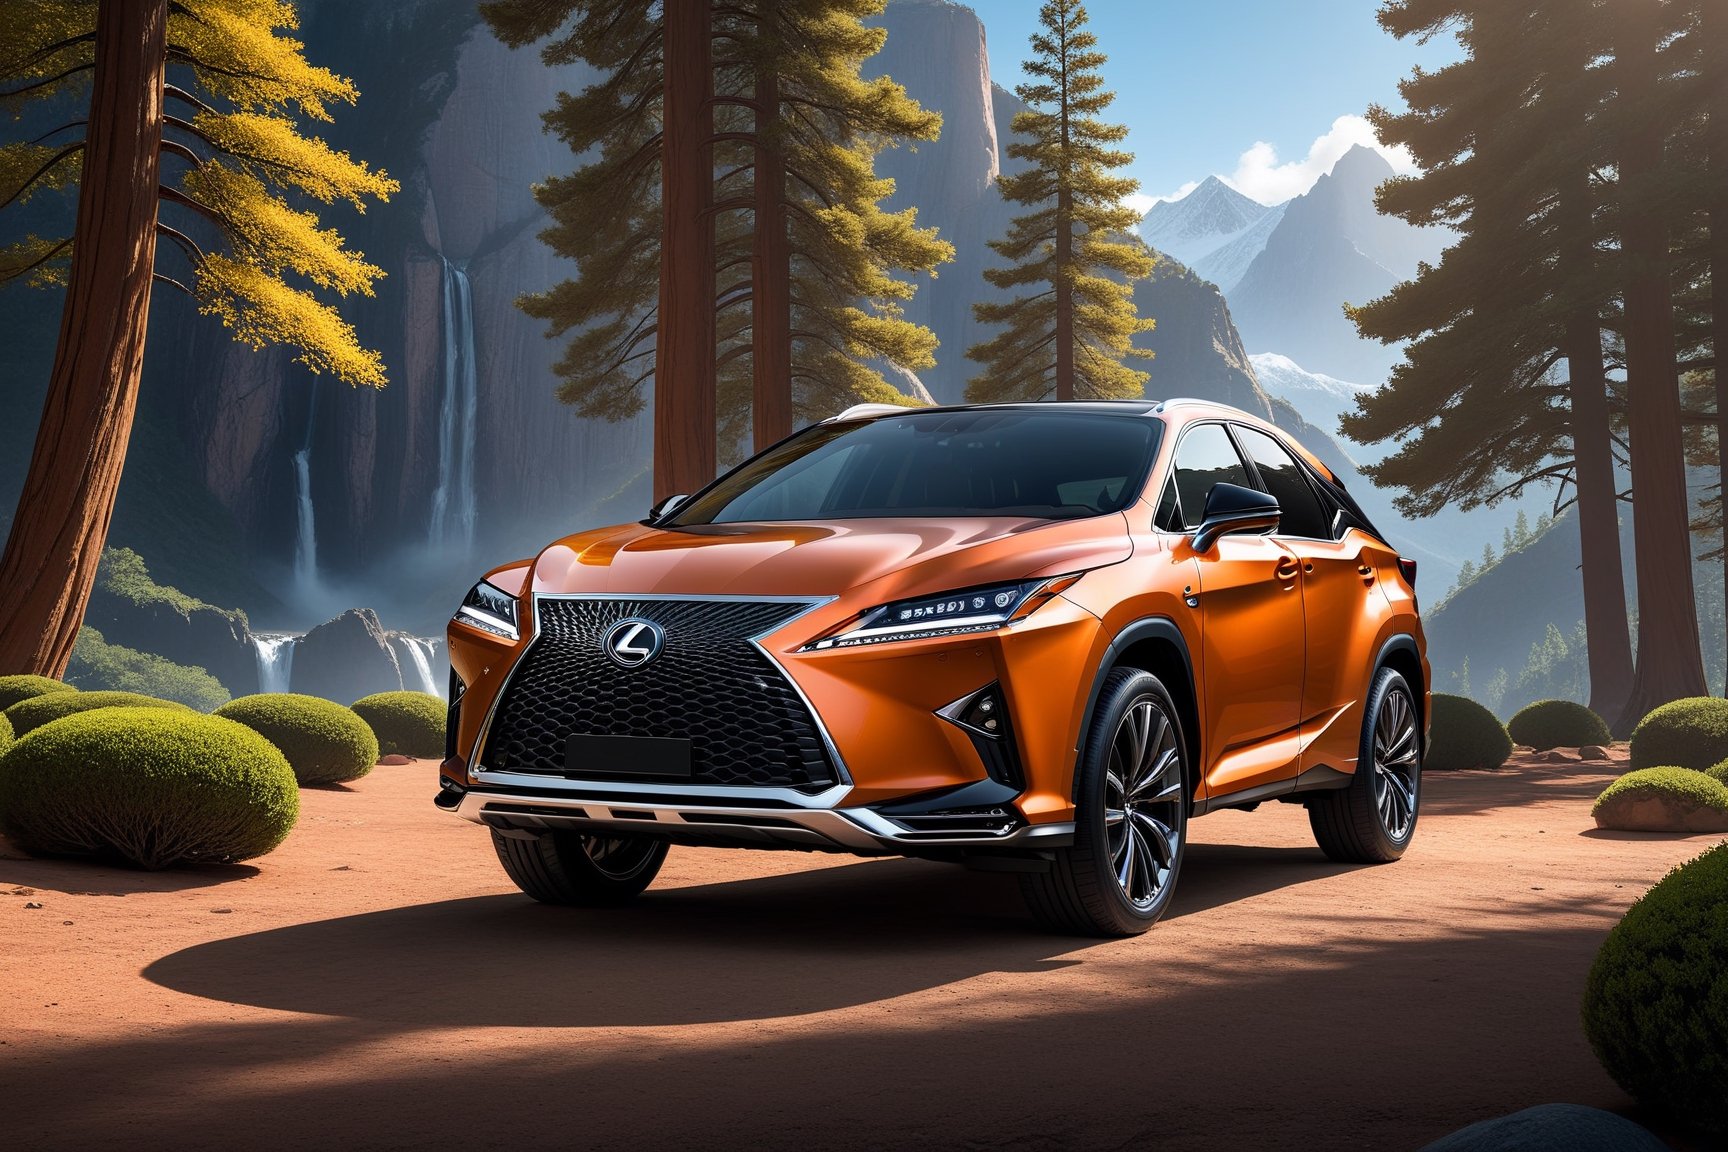 ((Ultra-realistic)) photo of Lexus RX 500h,sonic copper color,shiny spinning wheels,glossy black alloy rims with silver edge,bright turned on head lights
BREAK
(backdrop of yva11ey2,beautiful mountain with rock,tree,forest,vivid colors),wide shot,front view,distant view
BREAK
rule of thirds,studio photo,trending on artstation,perfect composition,(Hyper-detailed,masterpiece,best quality,32K,UHD,sharp focus,high contrast),depth of perspective,H effect,photo_b00ster, real_booster,more detail XL,y0sem1te,yva11ey2